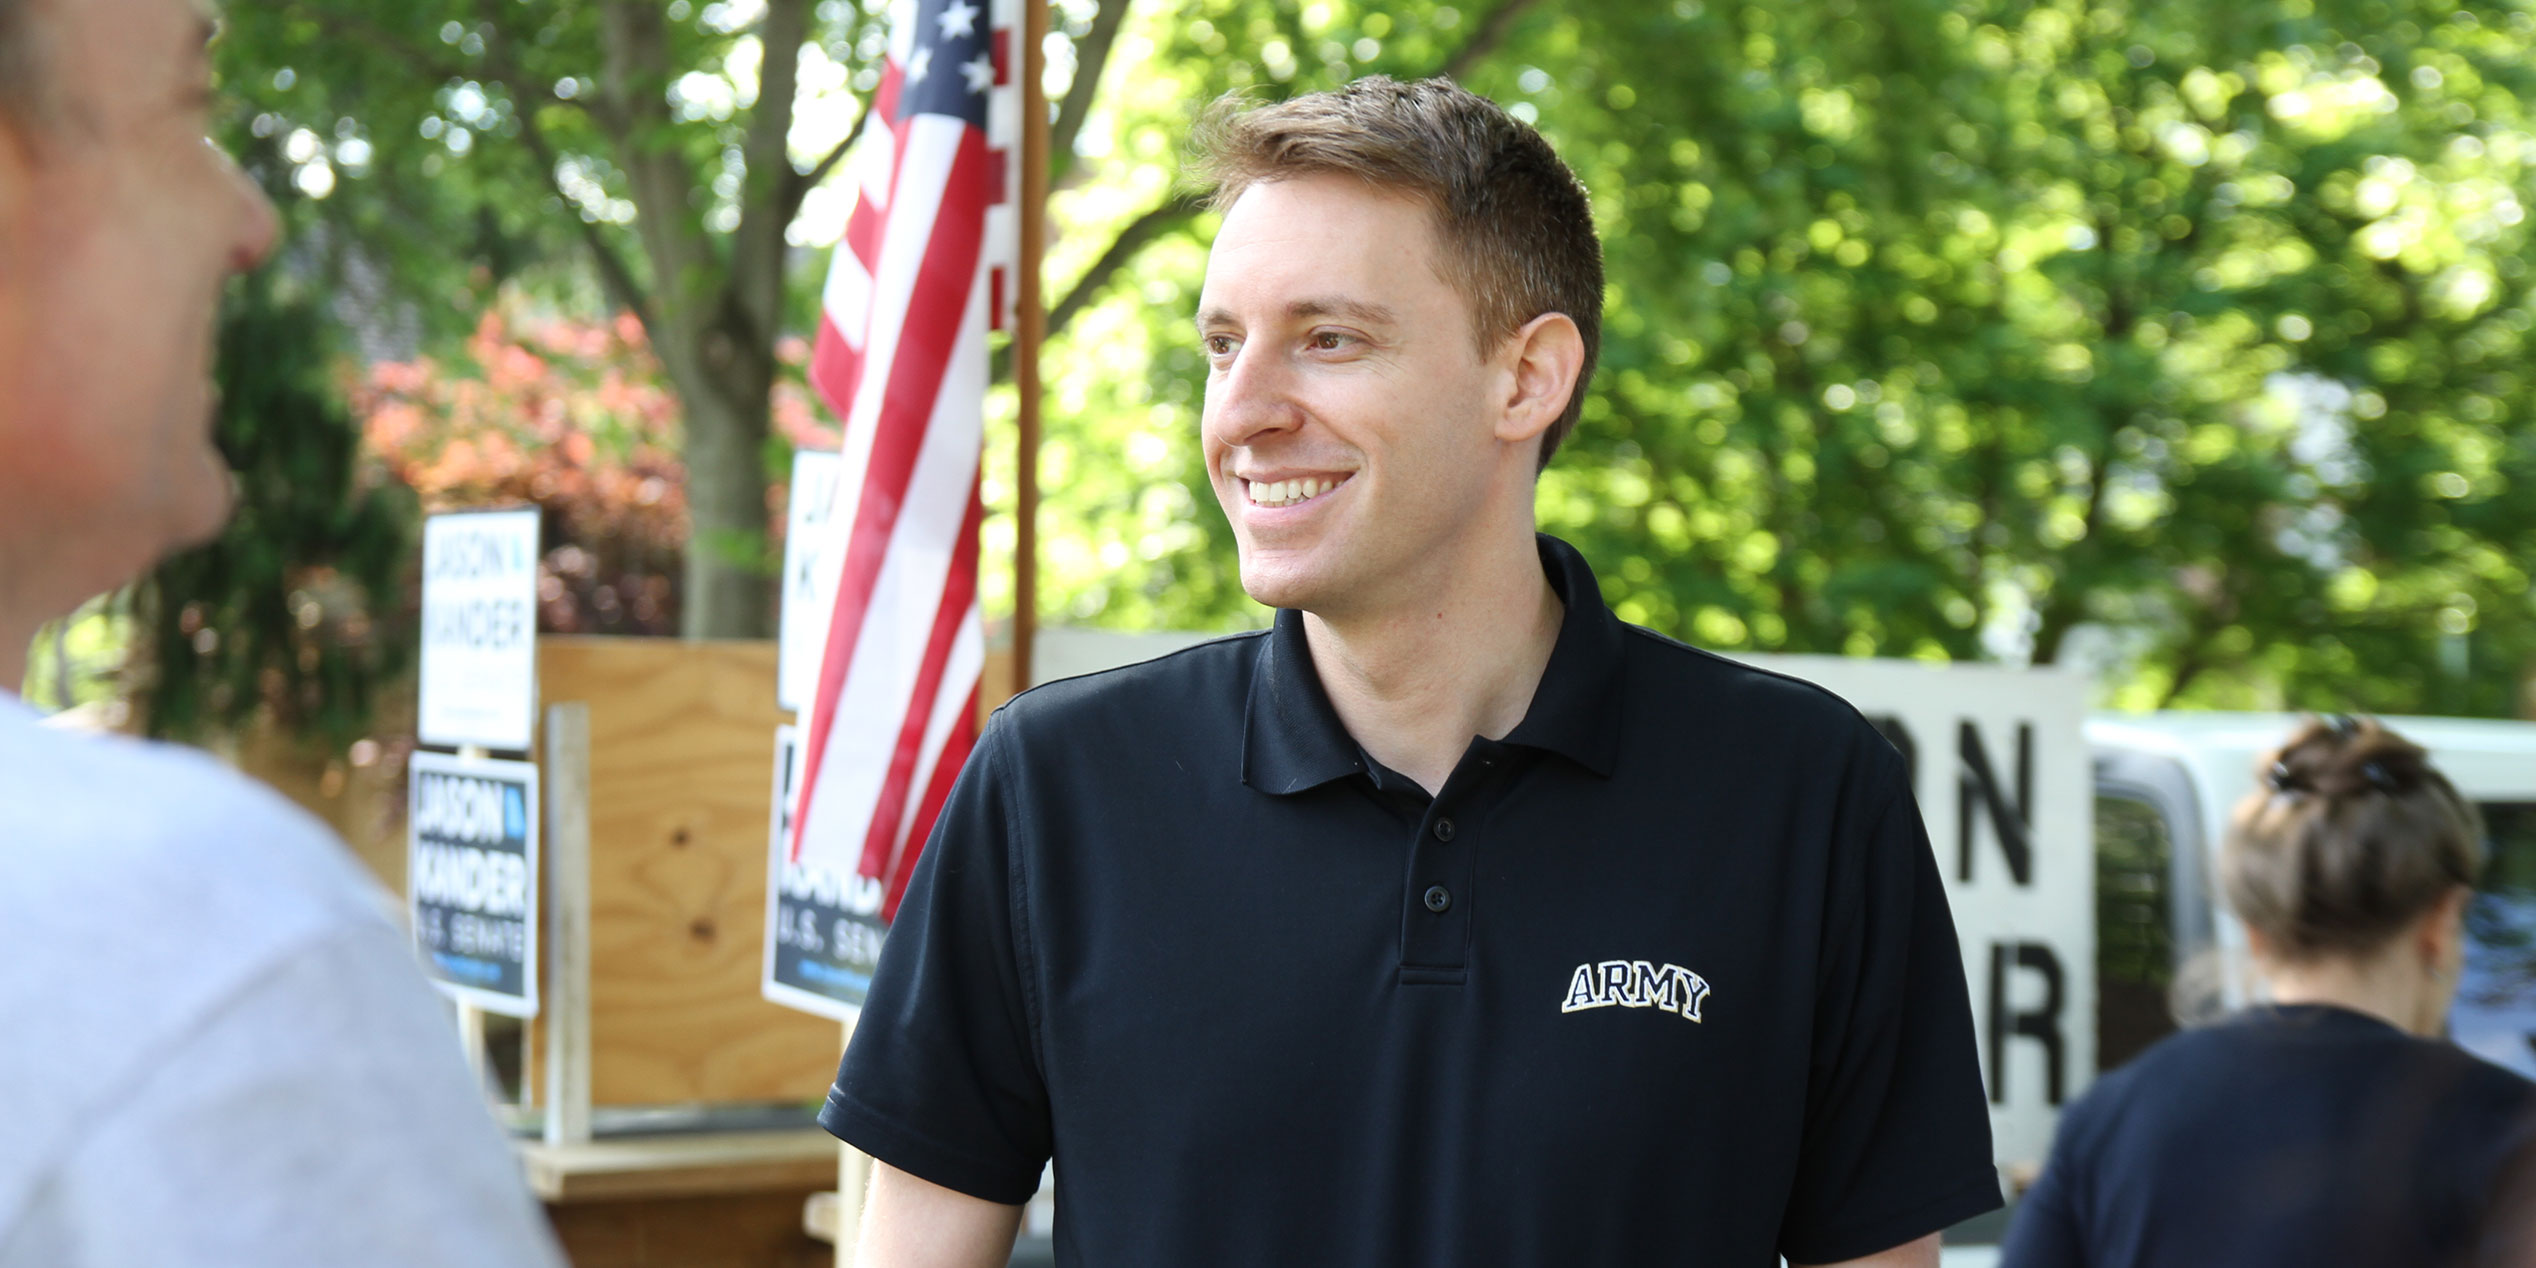 Jason Kander wearing an Army shirt standing outside with an American flag in the background